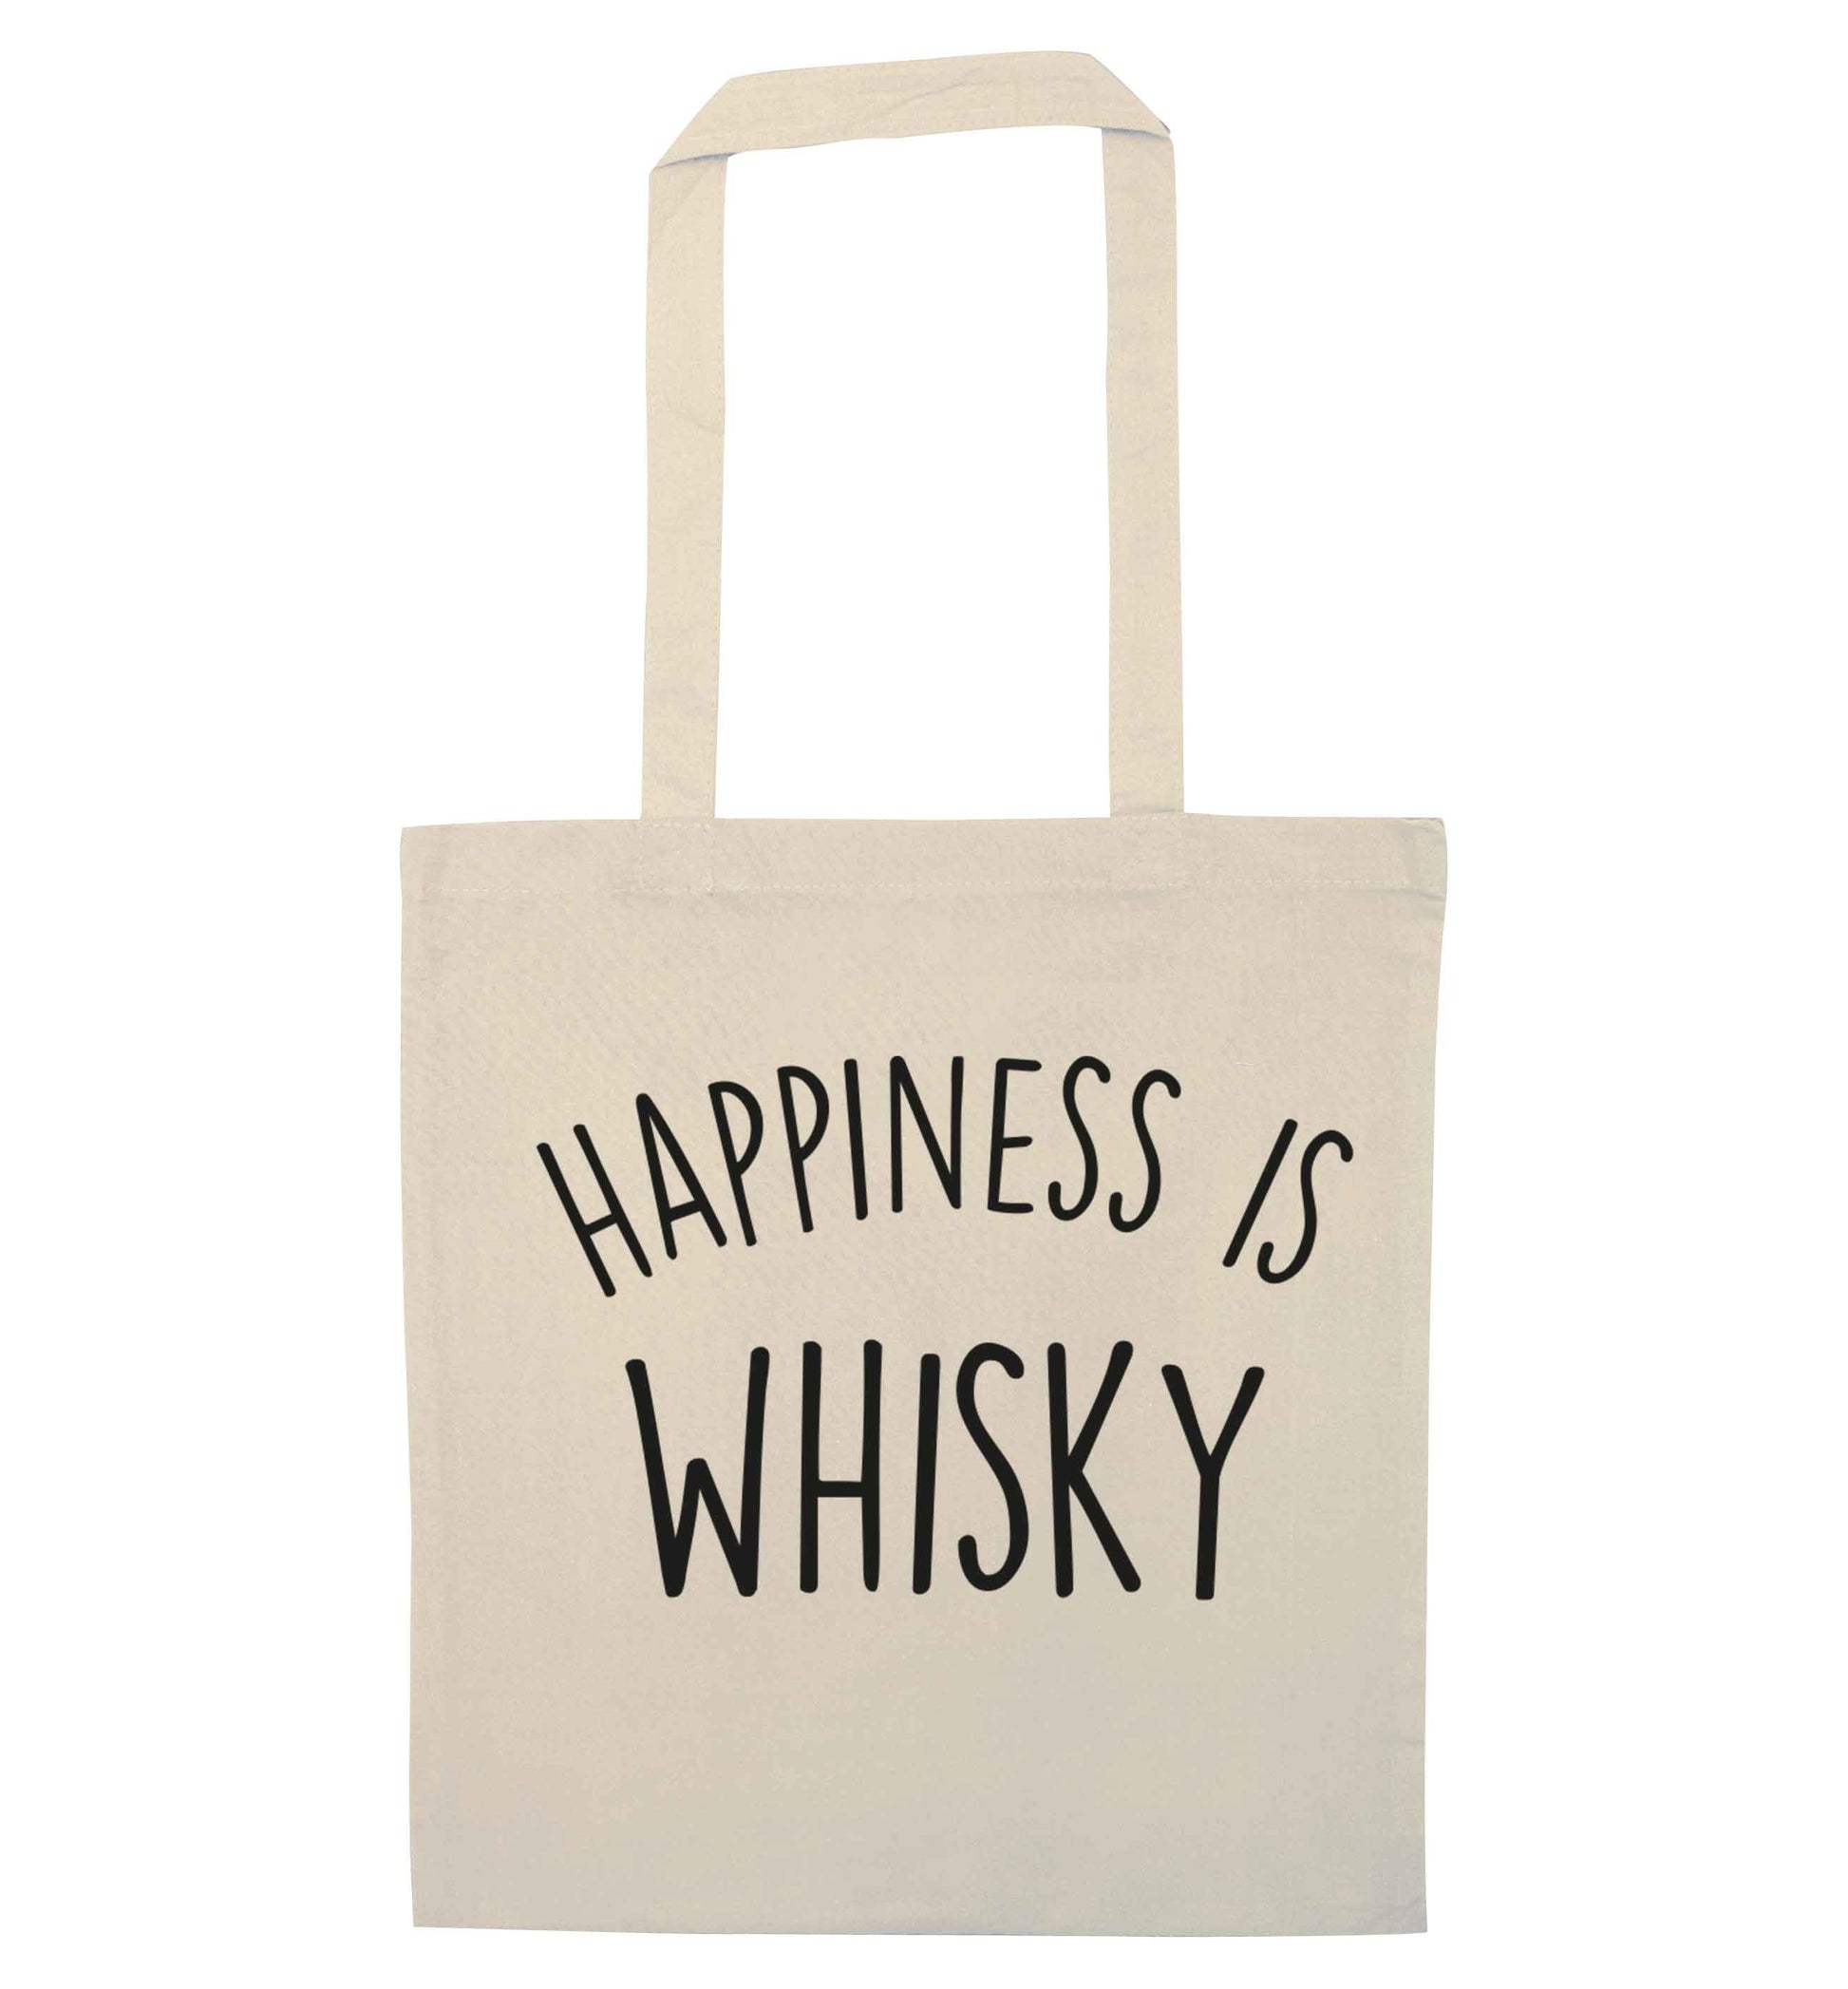 Happiness is whisky natural tote bag